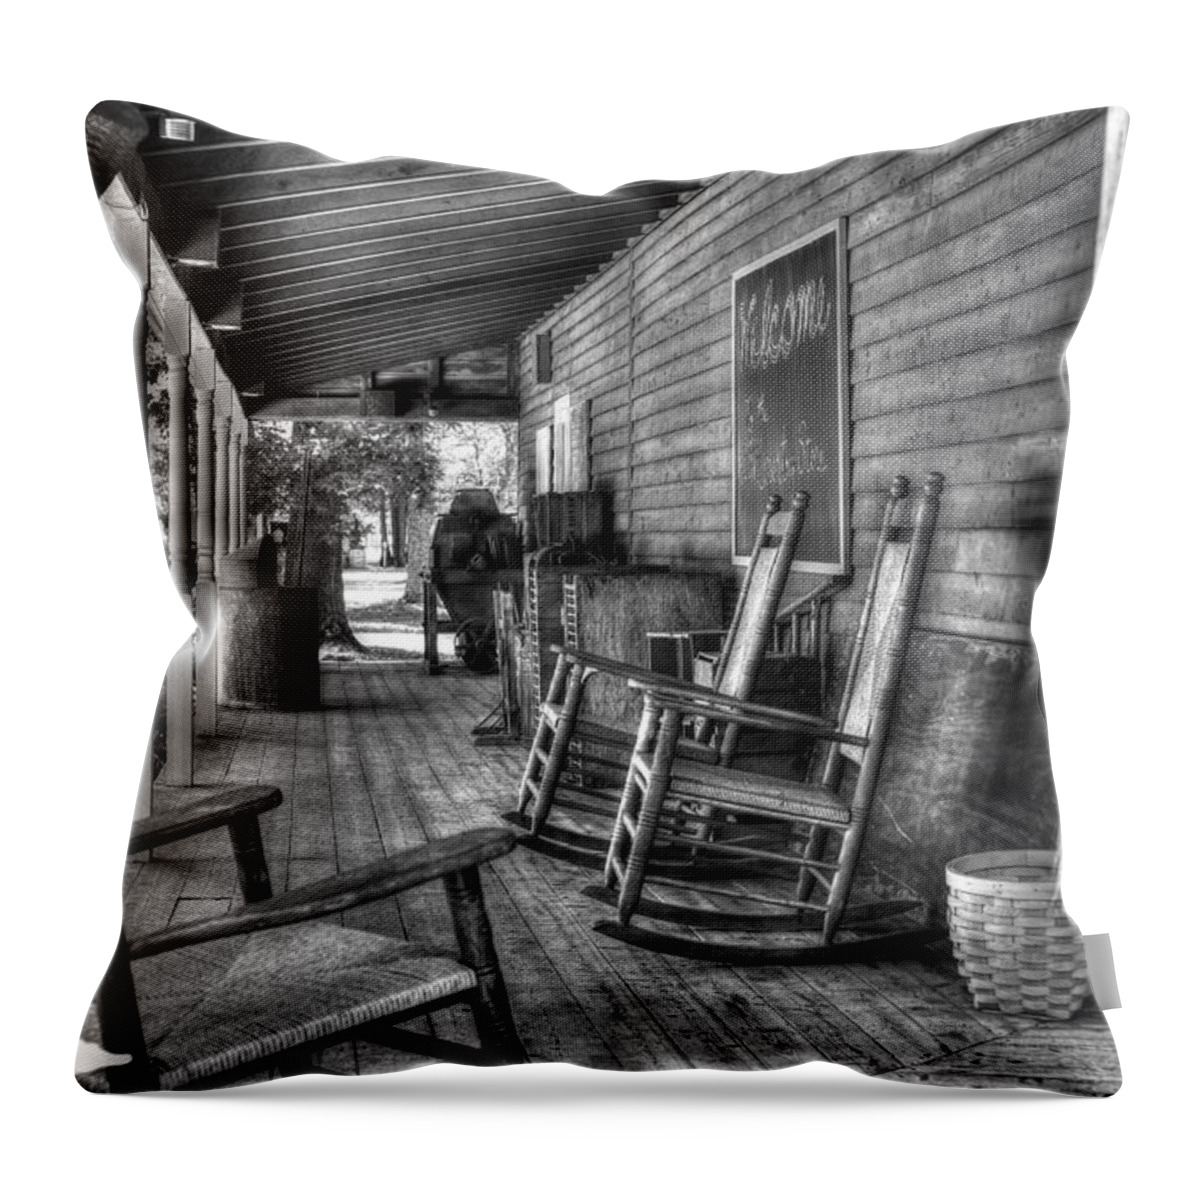 Photograph Throw Pillow featuring the photograph Country Store by Richard Gehlbach